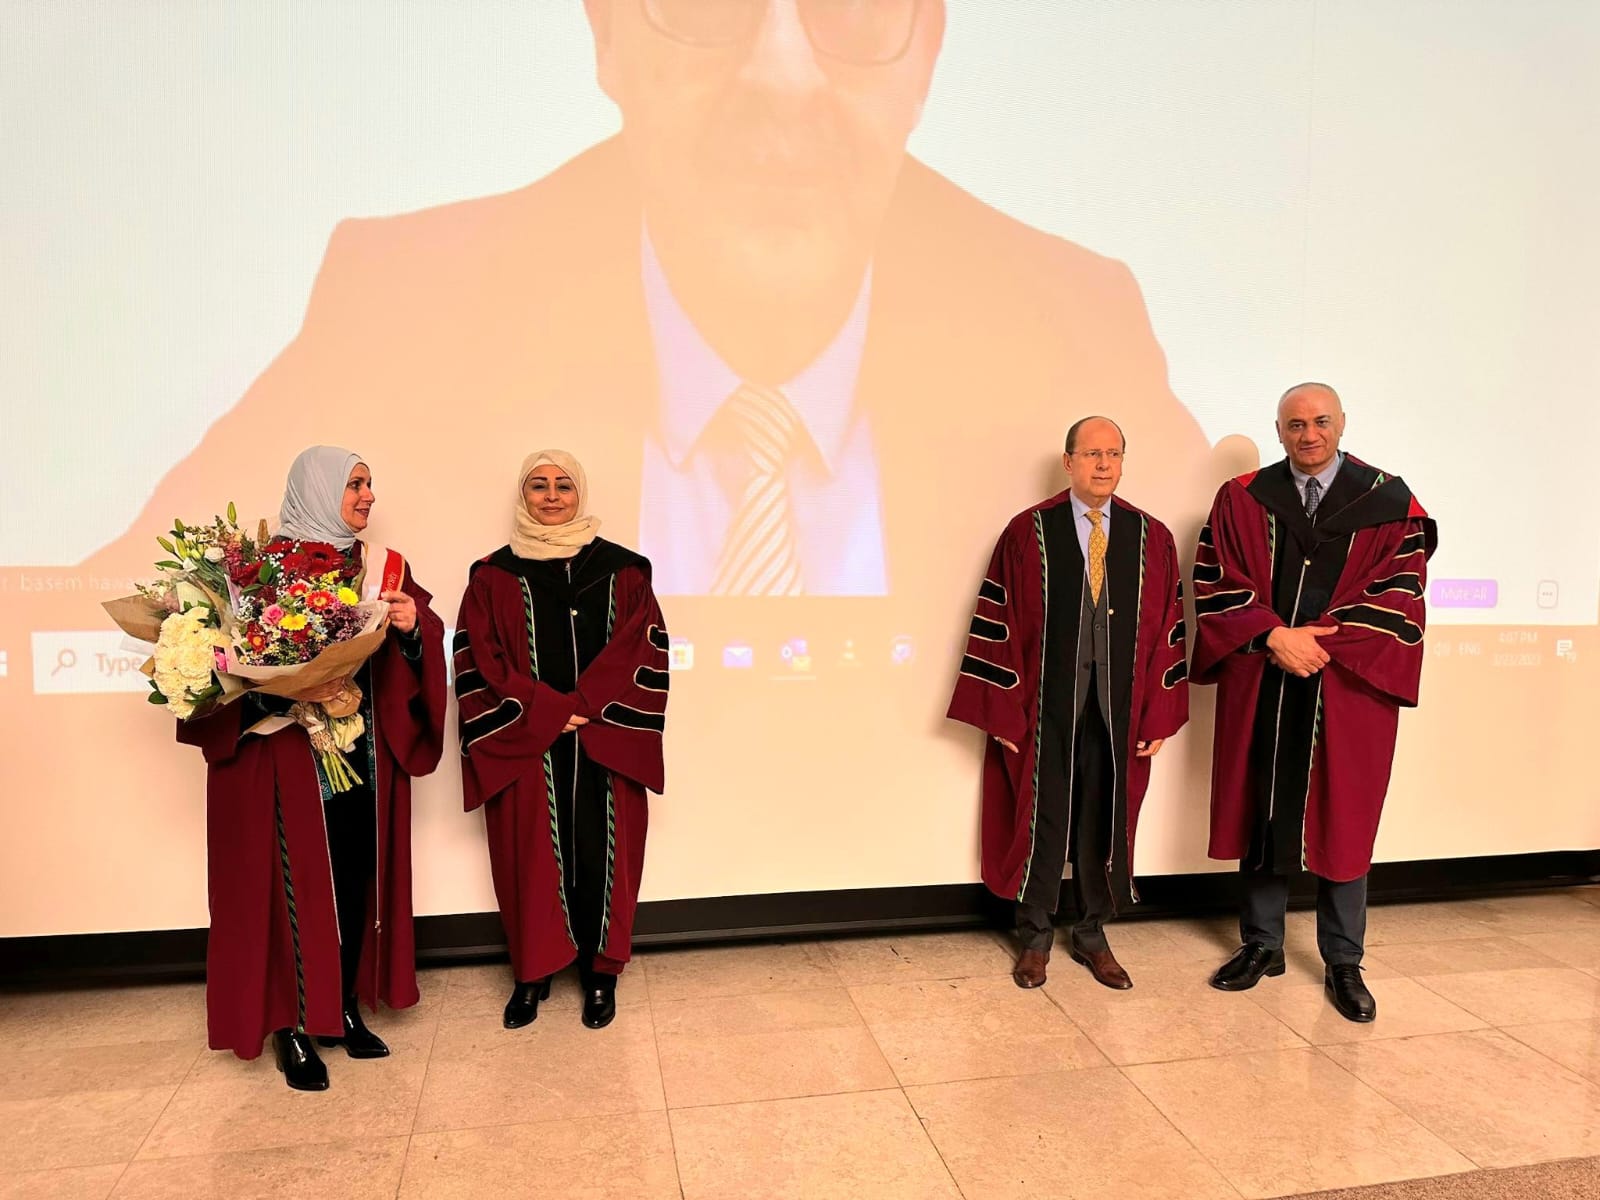 Defense A Ph.D. Dissertation by Huda Salameh in Educational Administration